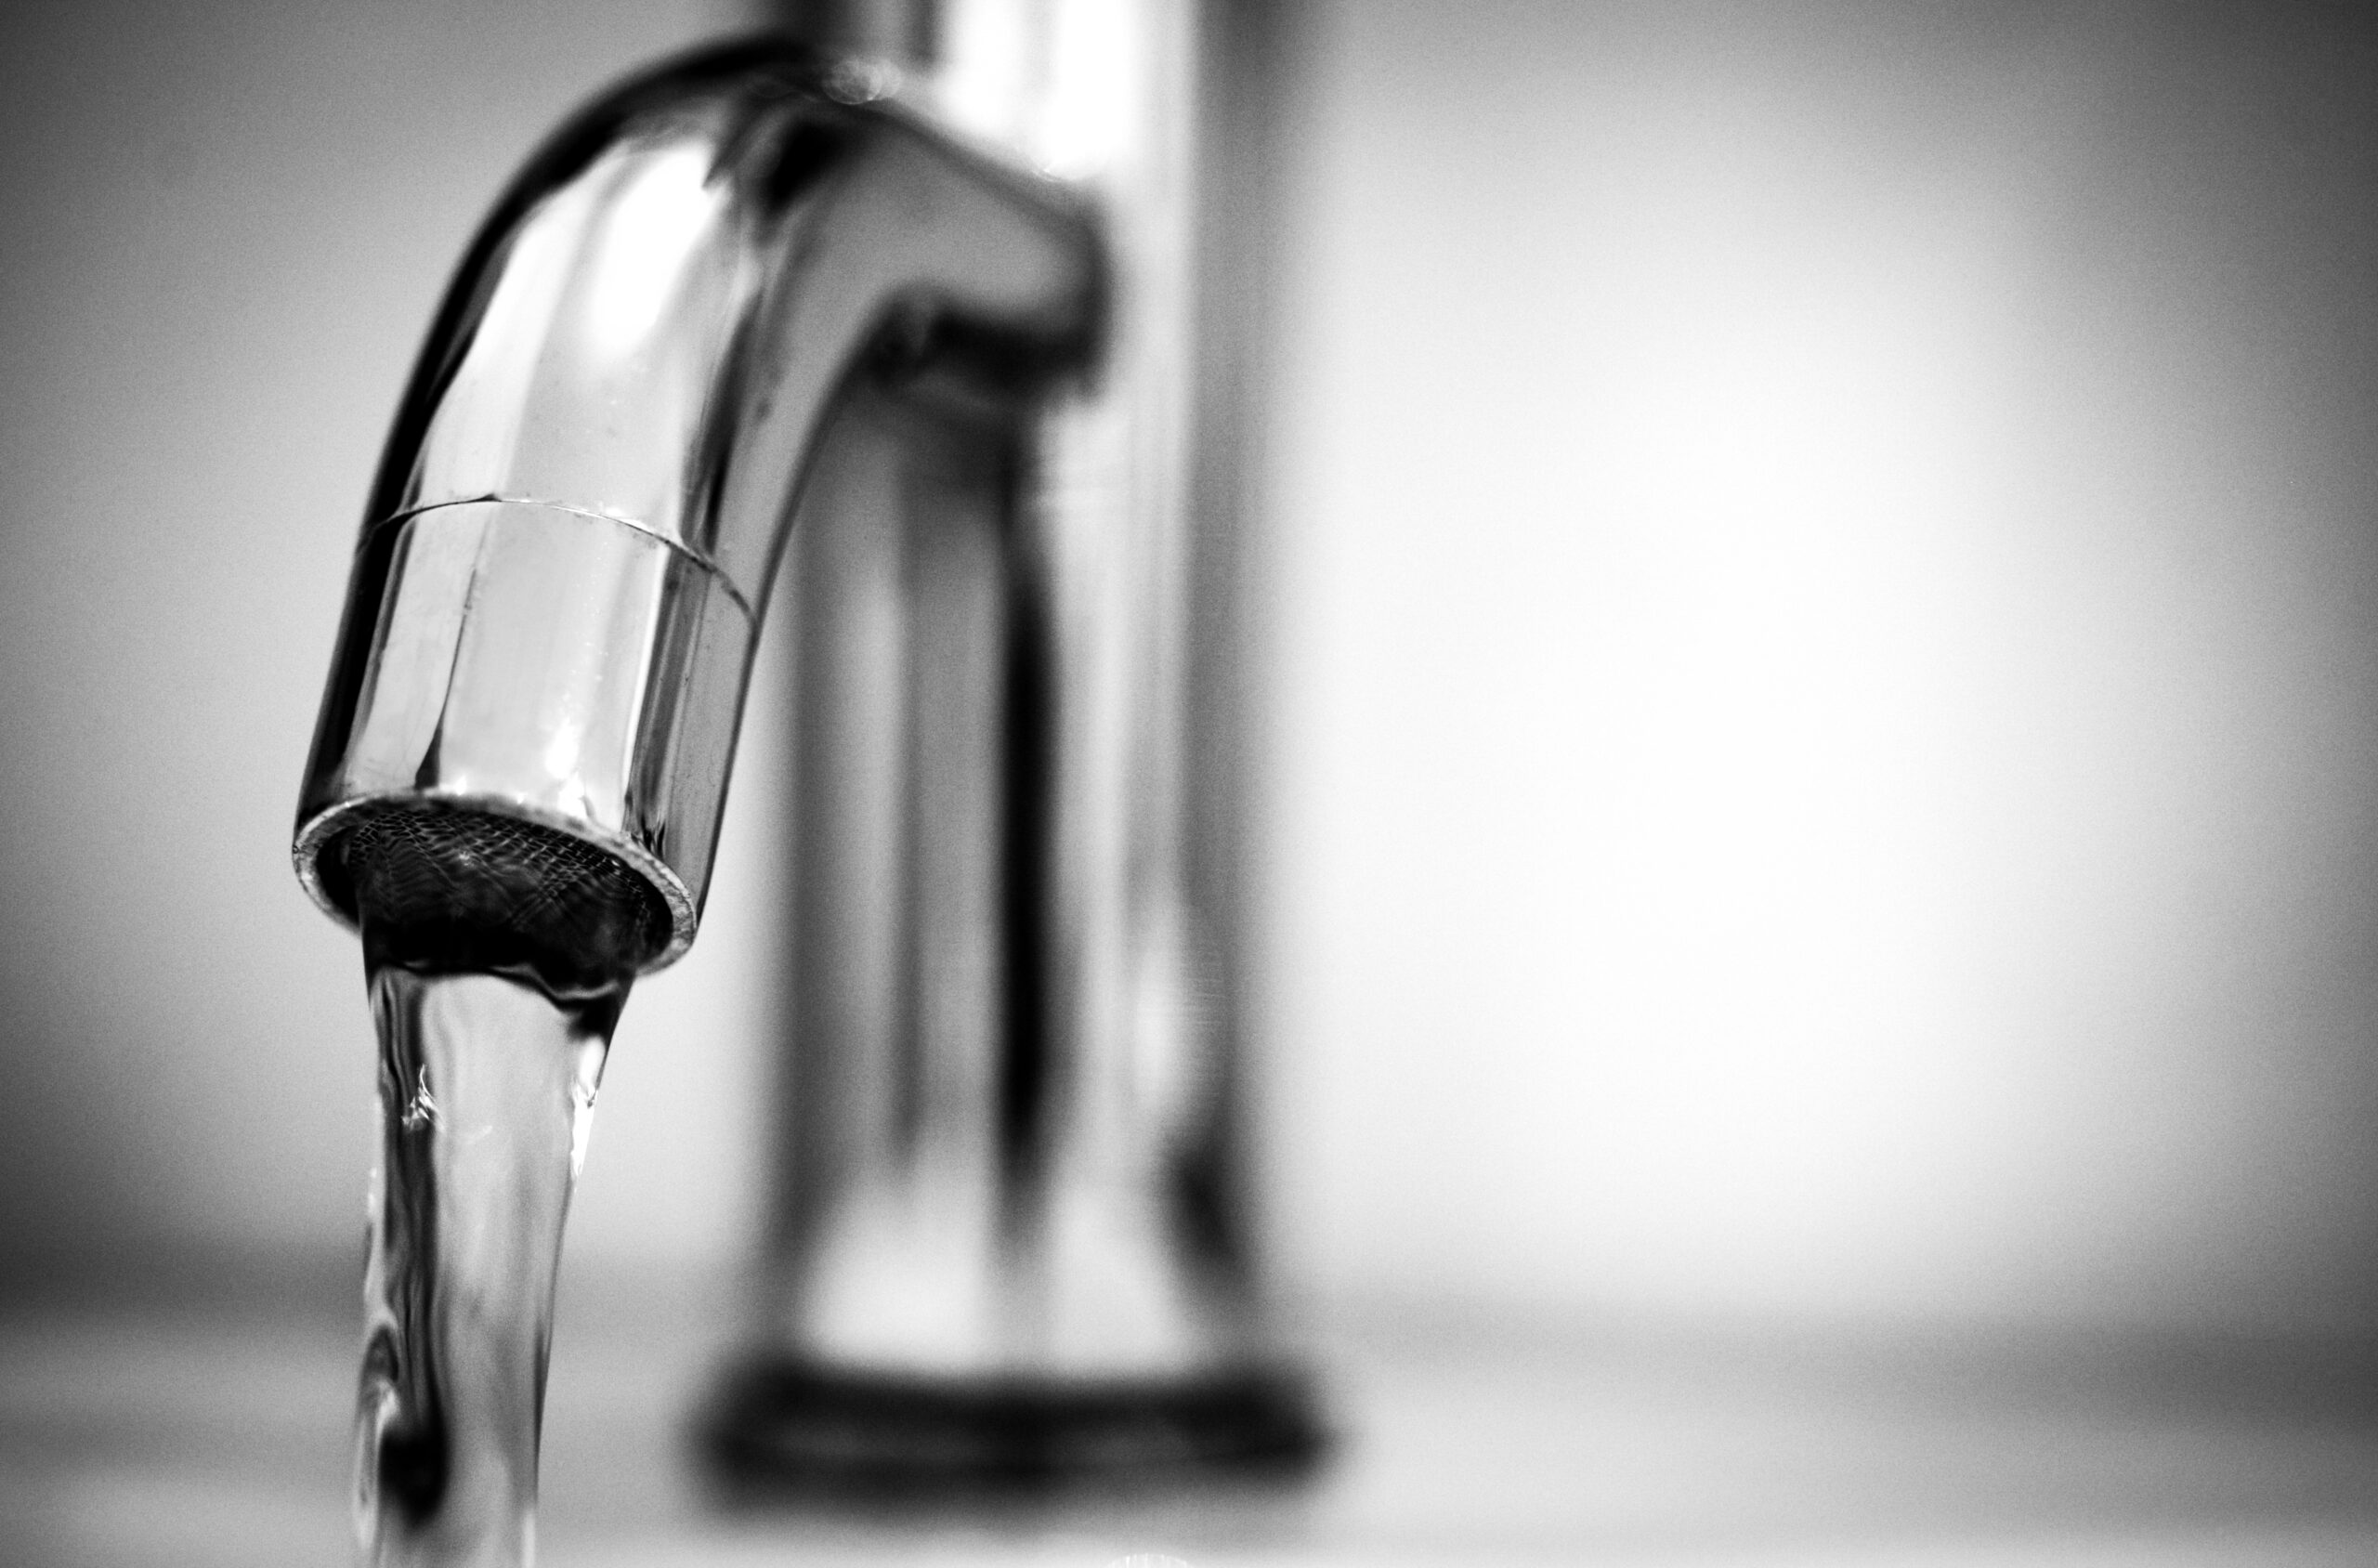 5 signs your hot water system needs a service